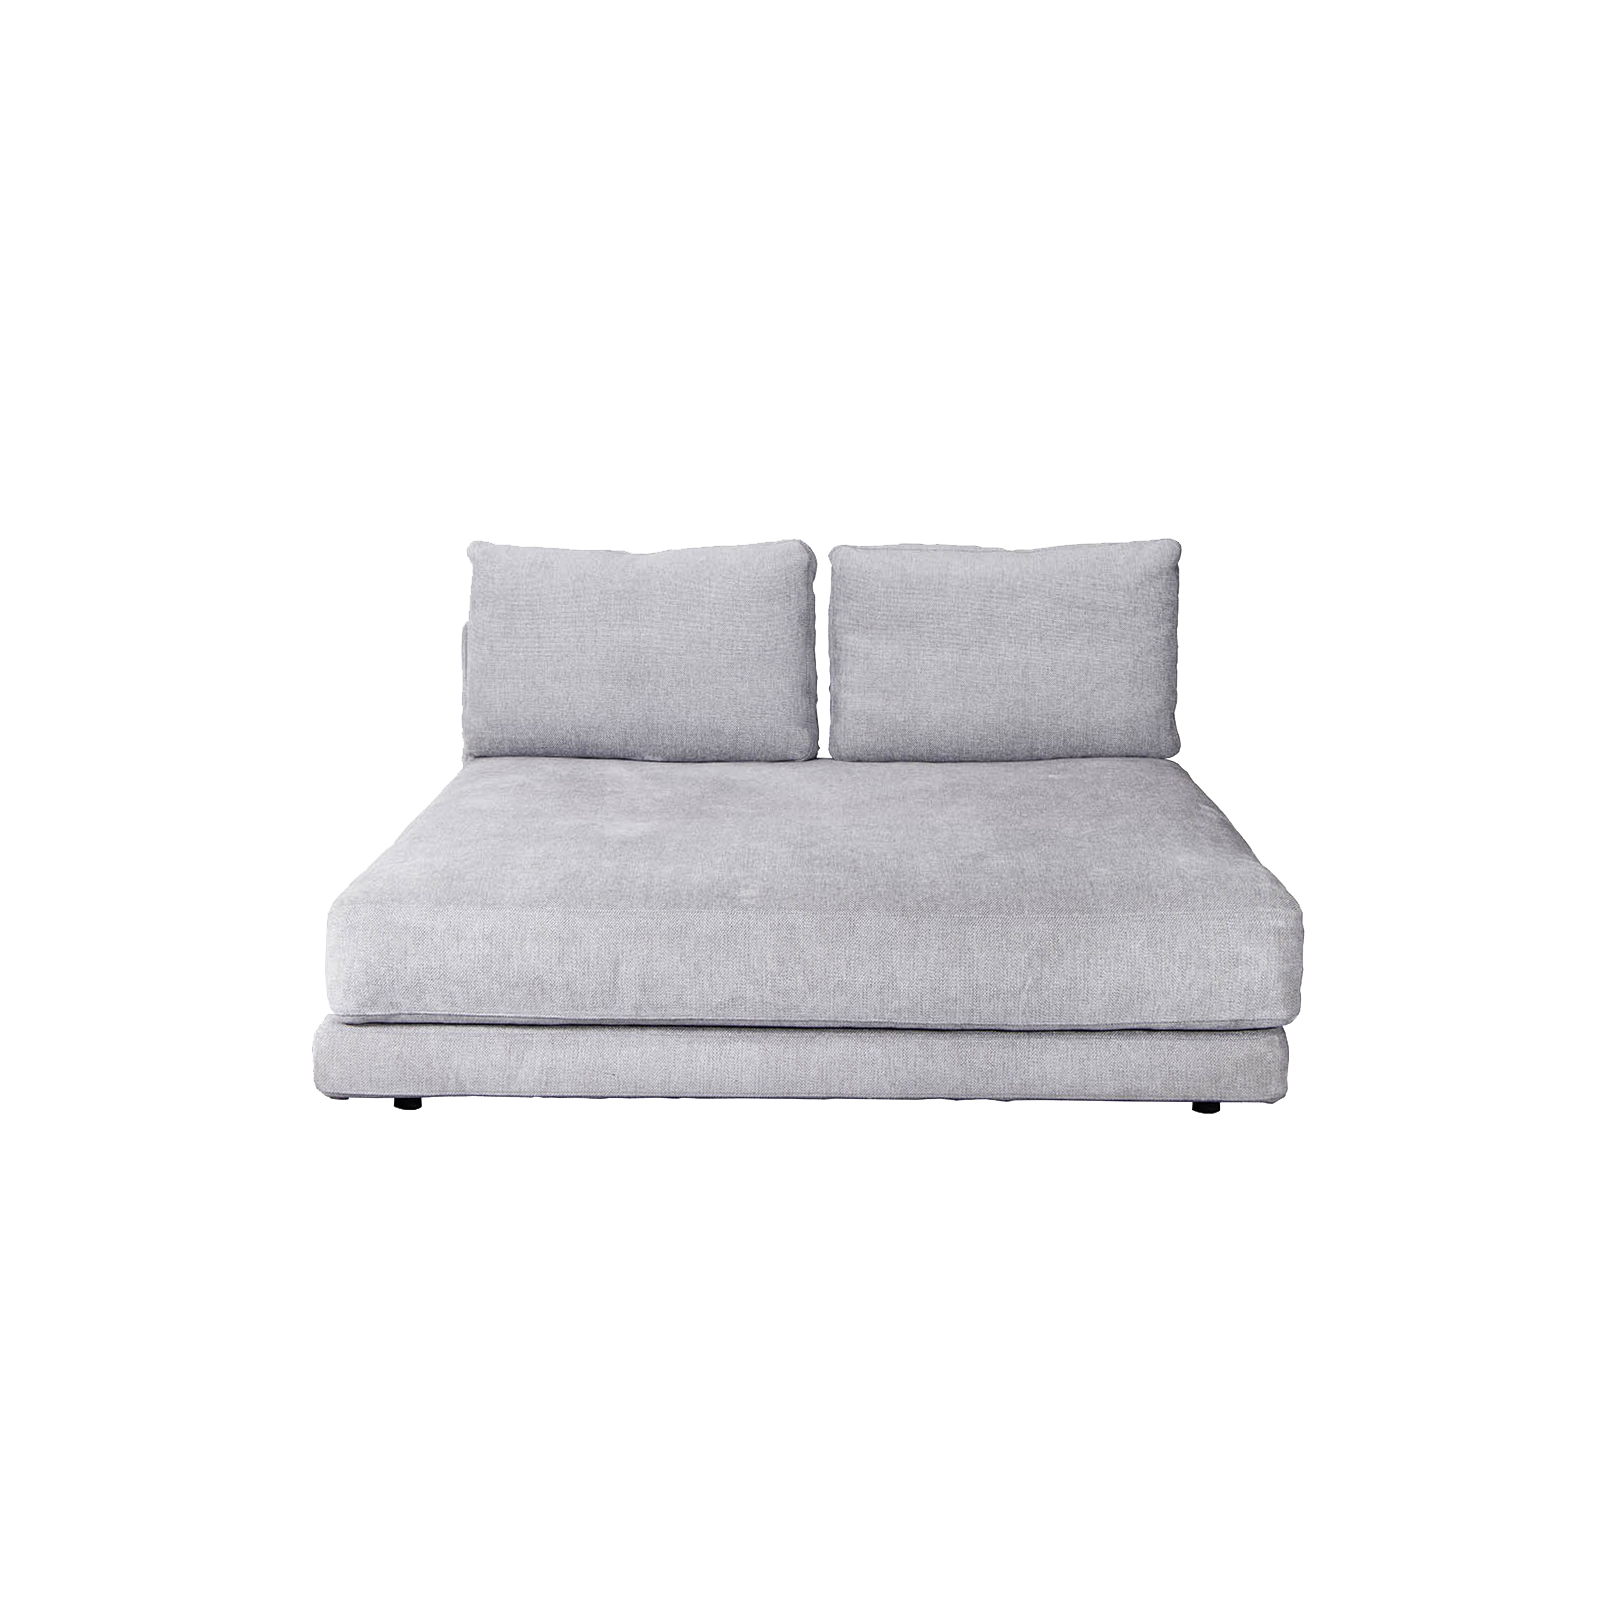 Scale doppel Daybed Modul aus Cane-line Ambience in Dark Grey